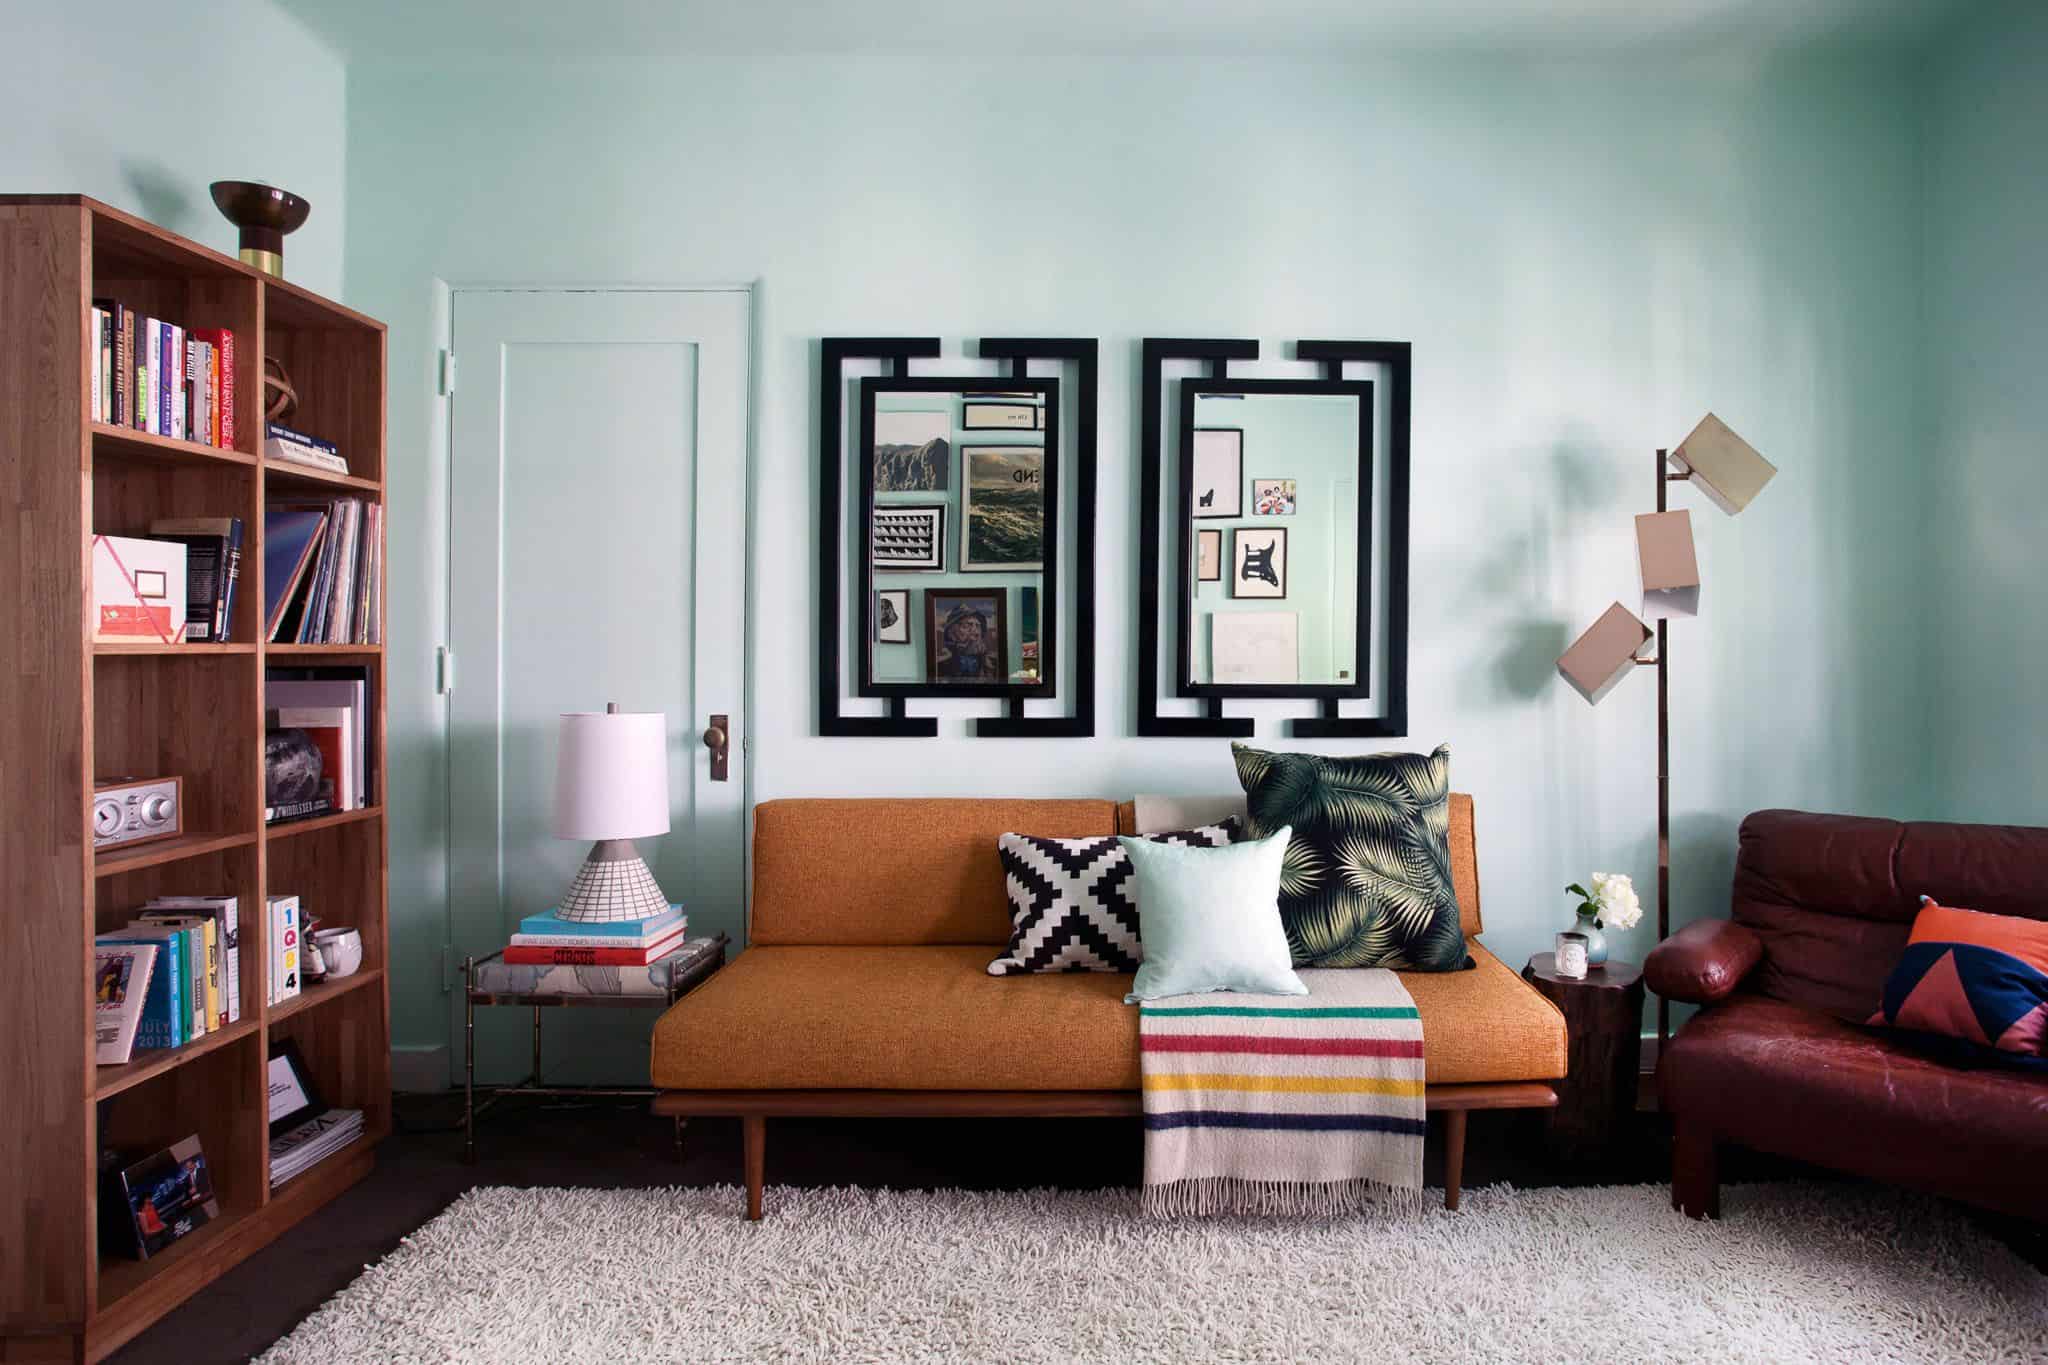 retro daybed How To Add Retro Style To Any Room